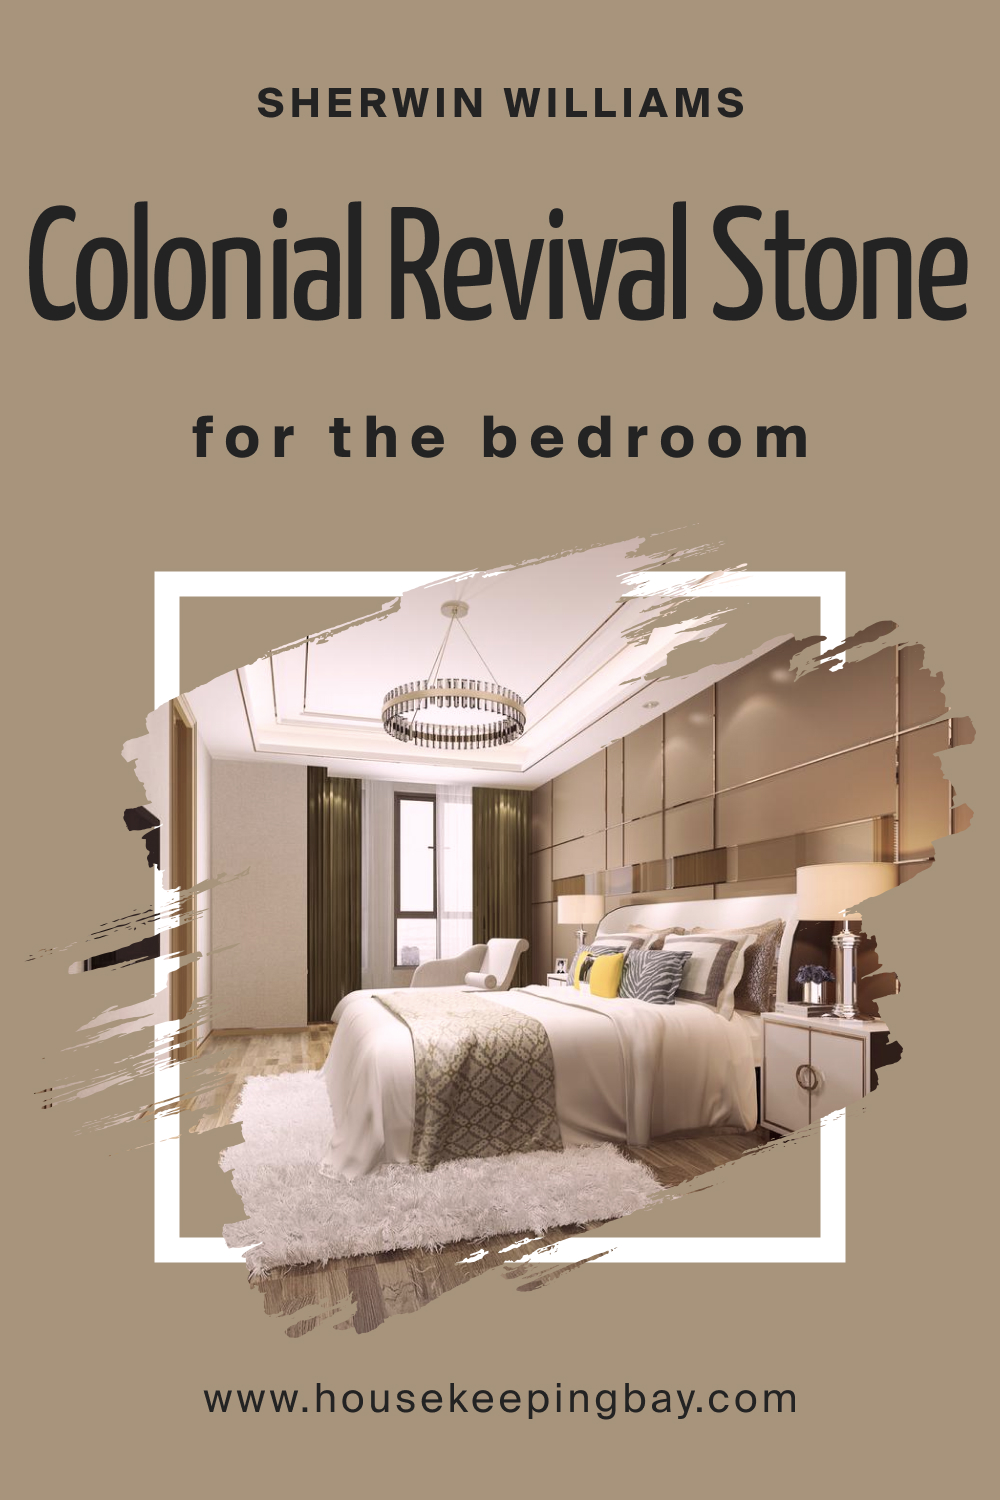 Sherwin Williams. SW 2827 Colonial Revival Stone For the bedroom